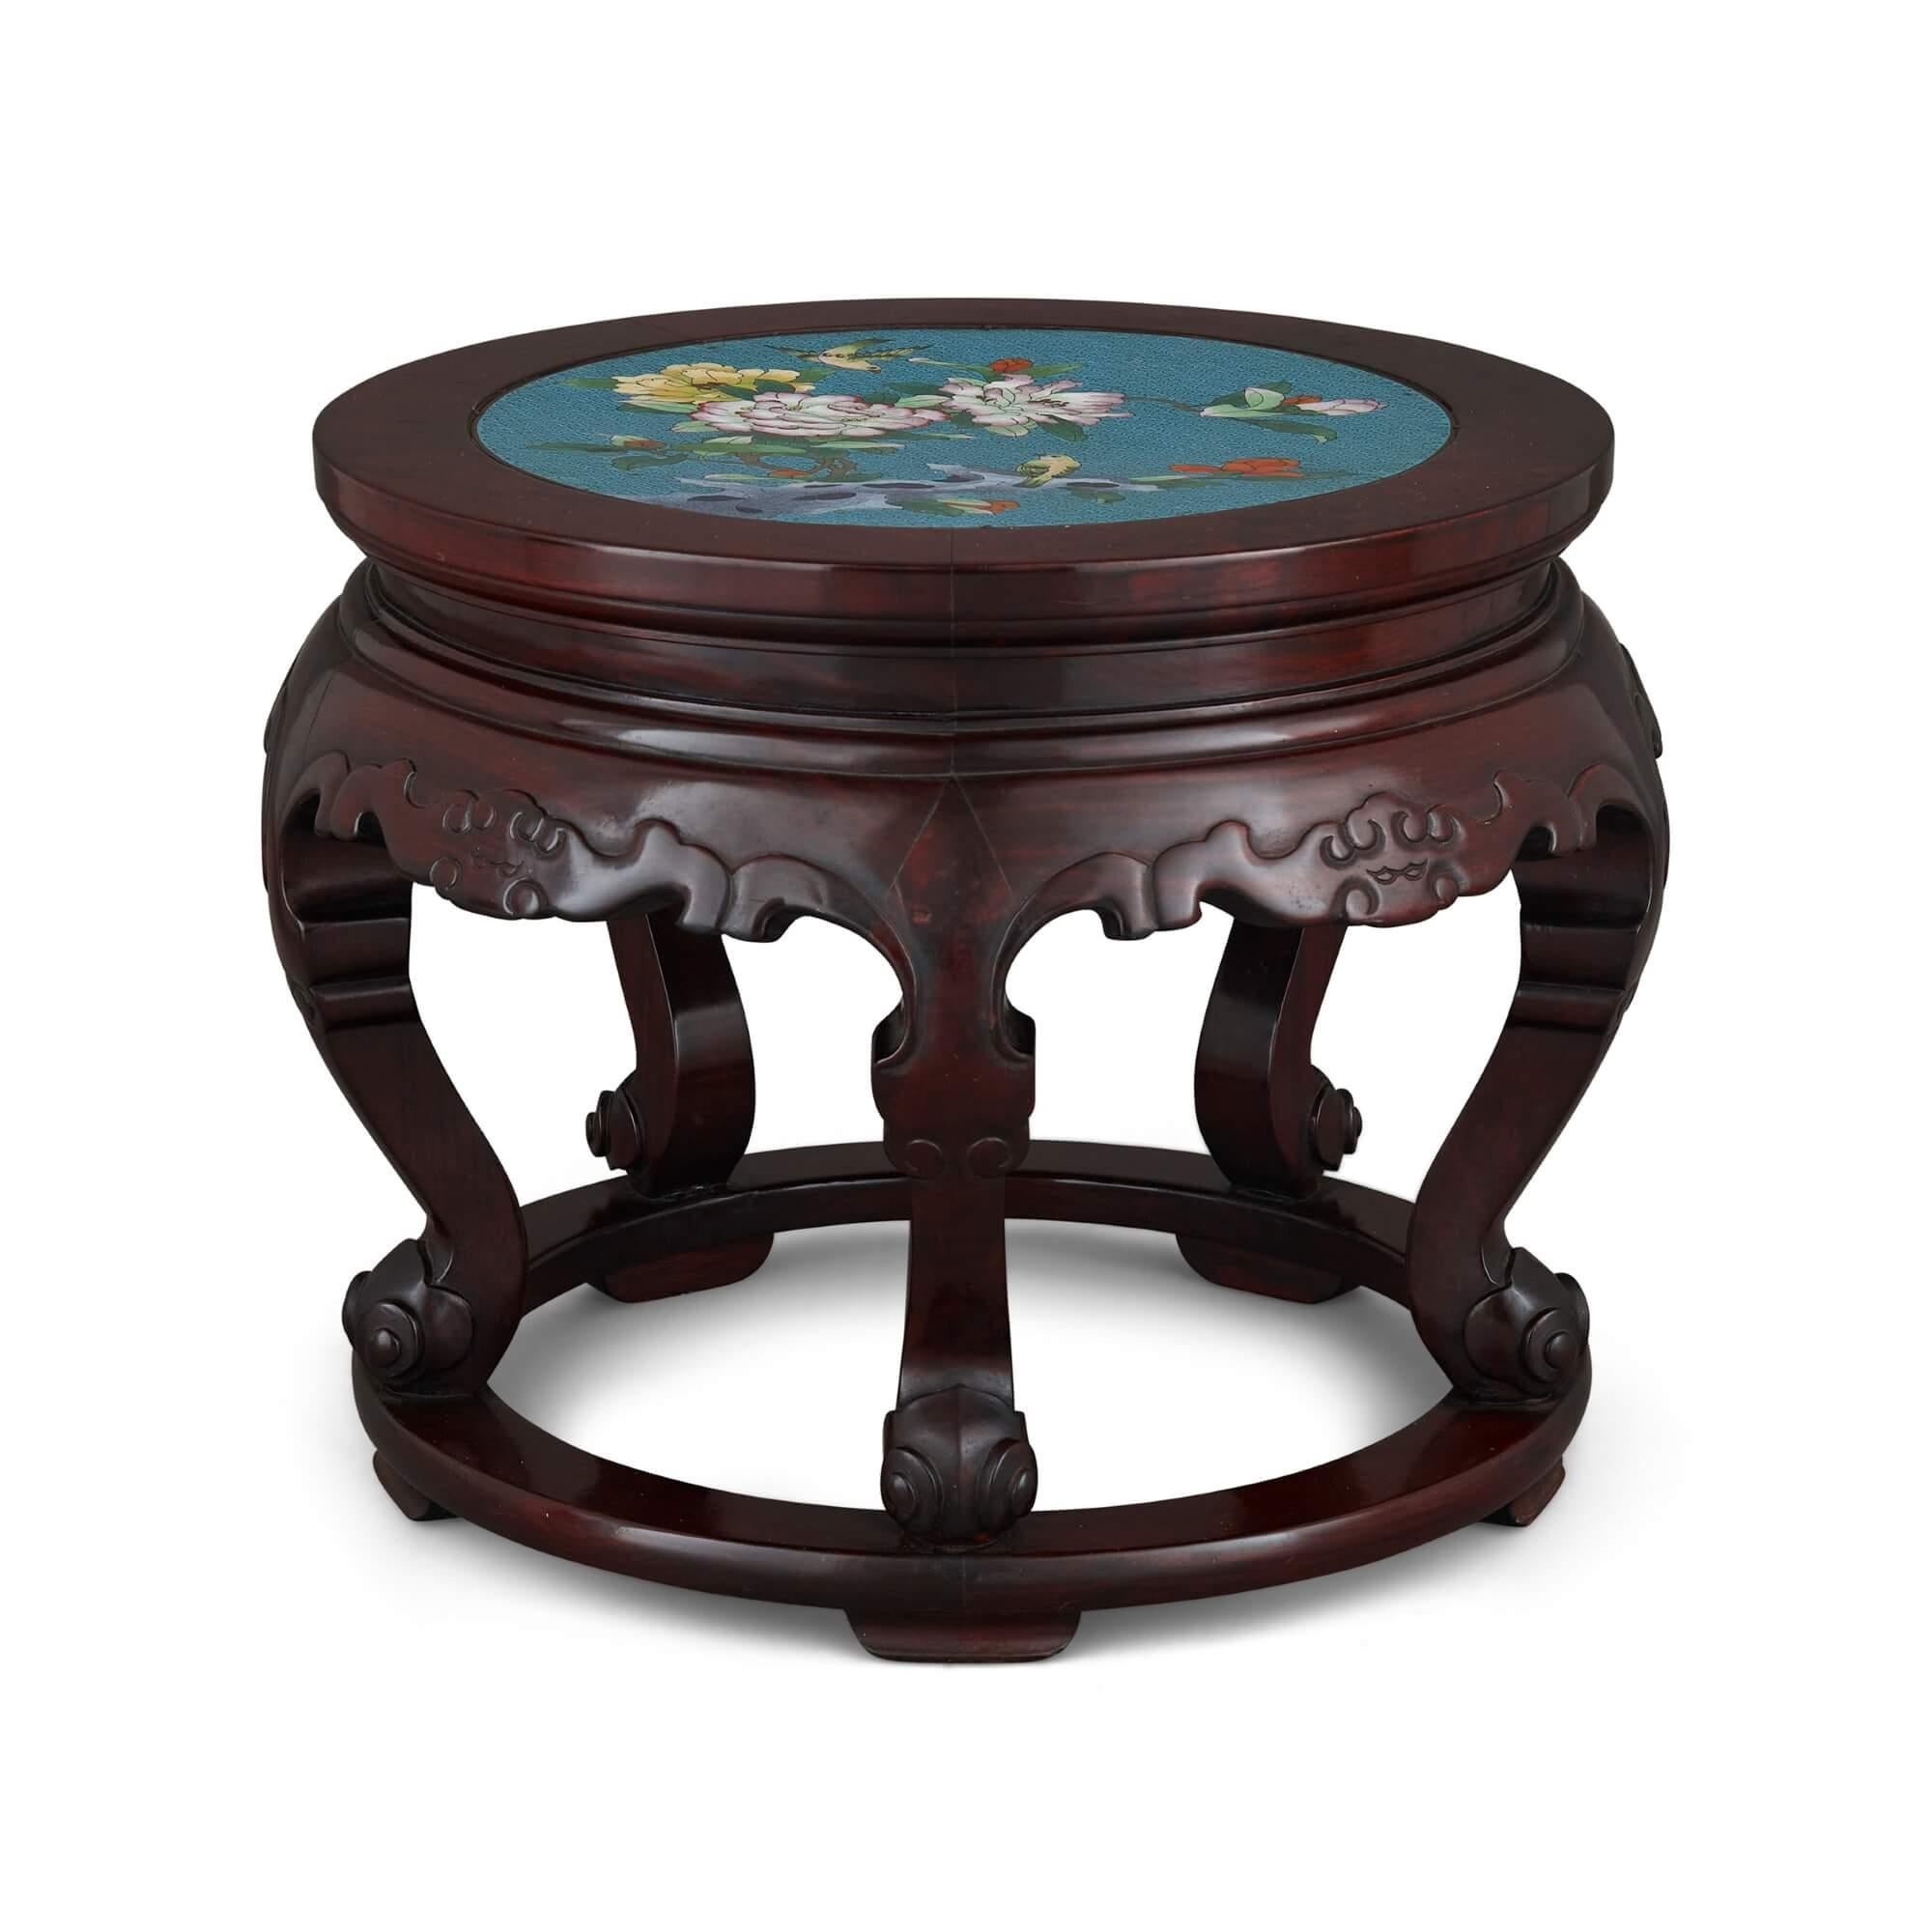 Chinese Export Chinese Cloisonné Enamel Inset Circular Carved Hardwood Pedestal For Sale